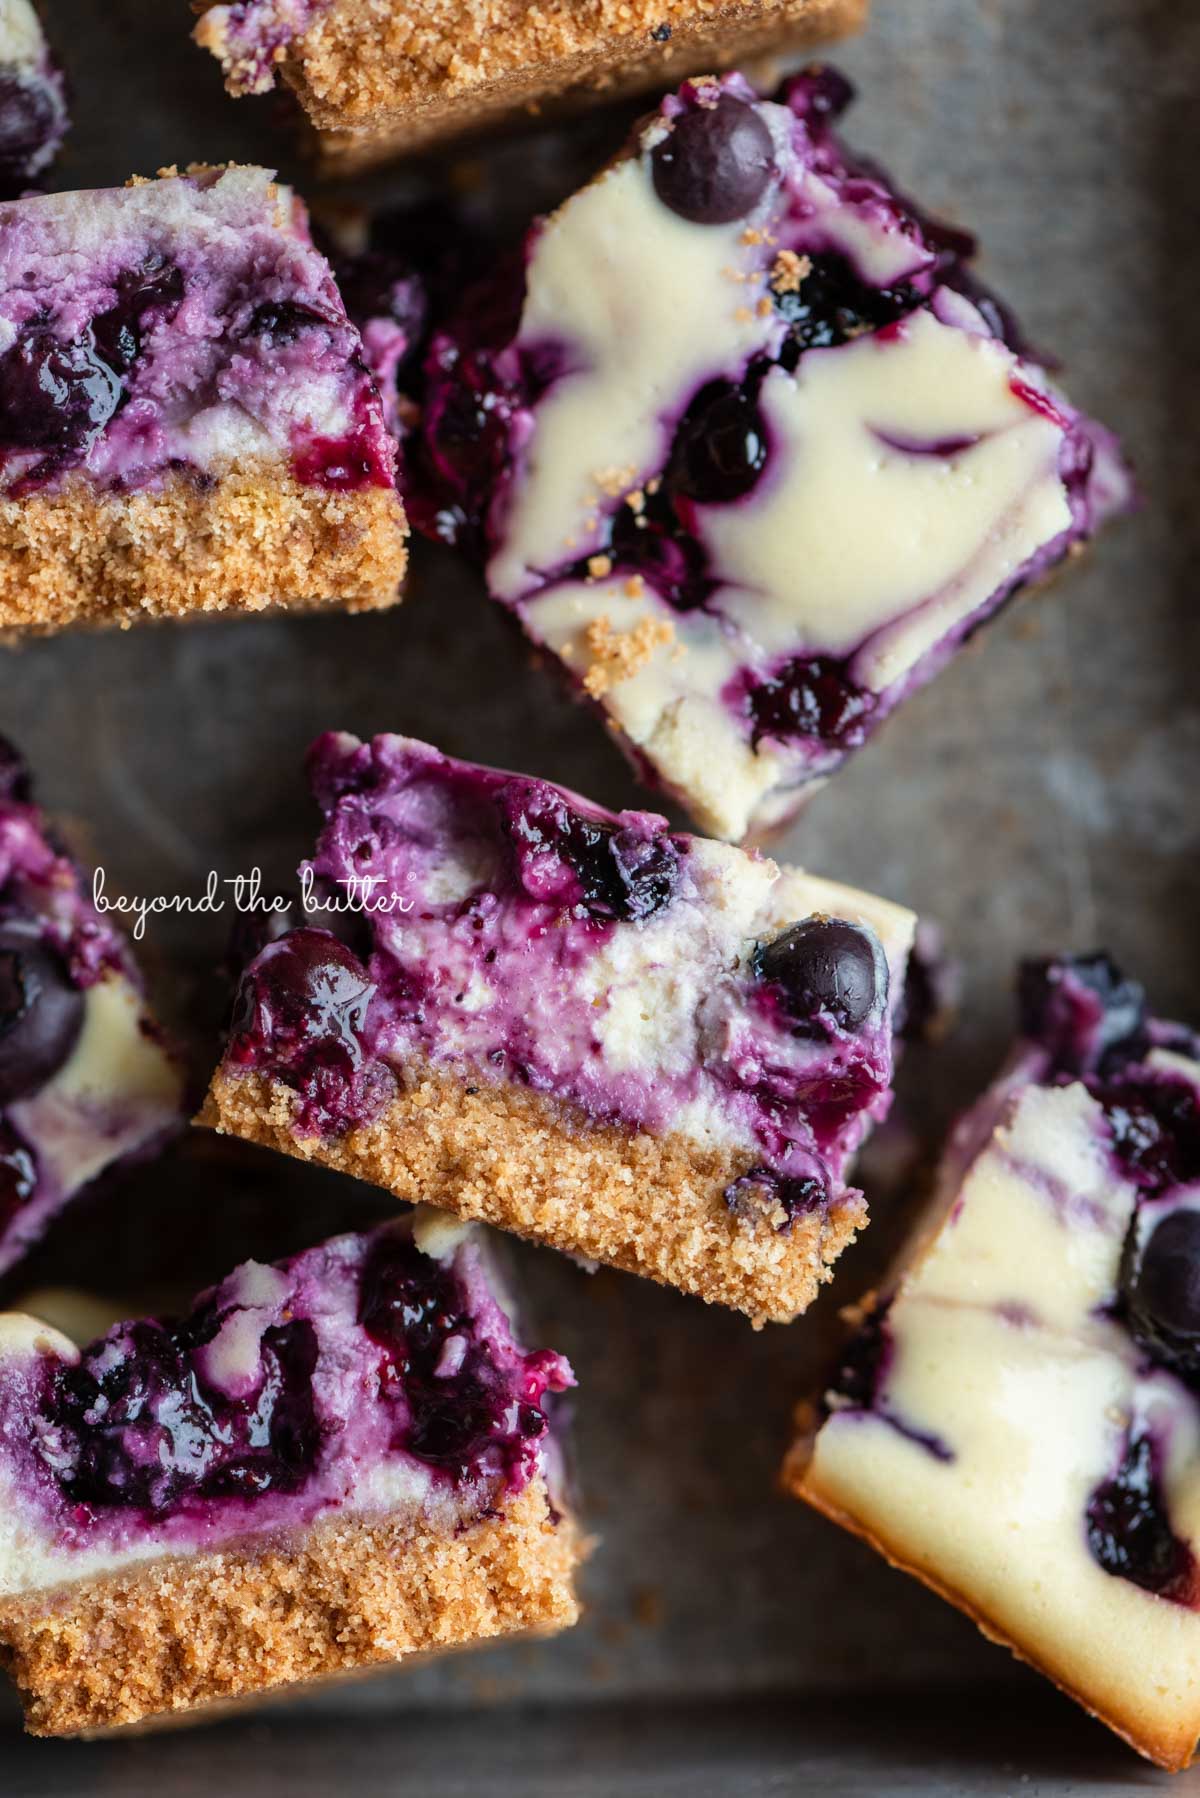 Sliced blueberry swirl cheesecake bars in a vintage baking pan from BeyondtheButter.com | © Beyond the Butter®